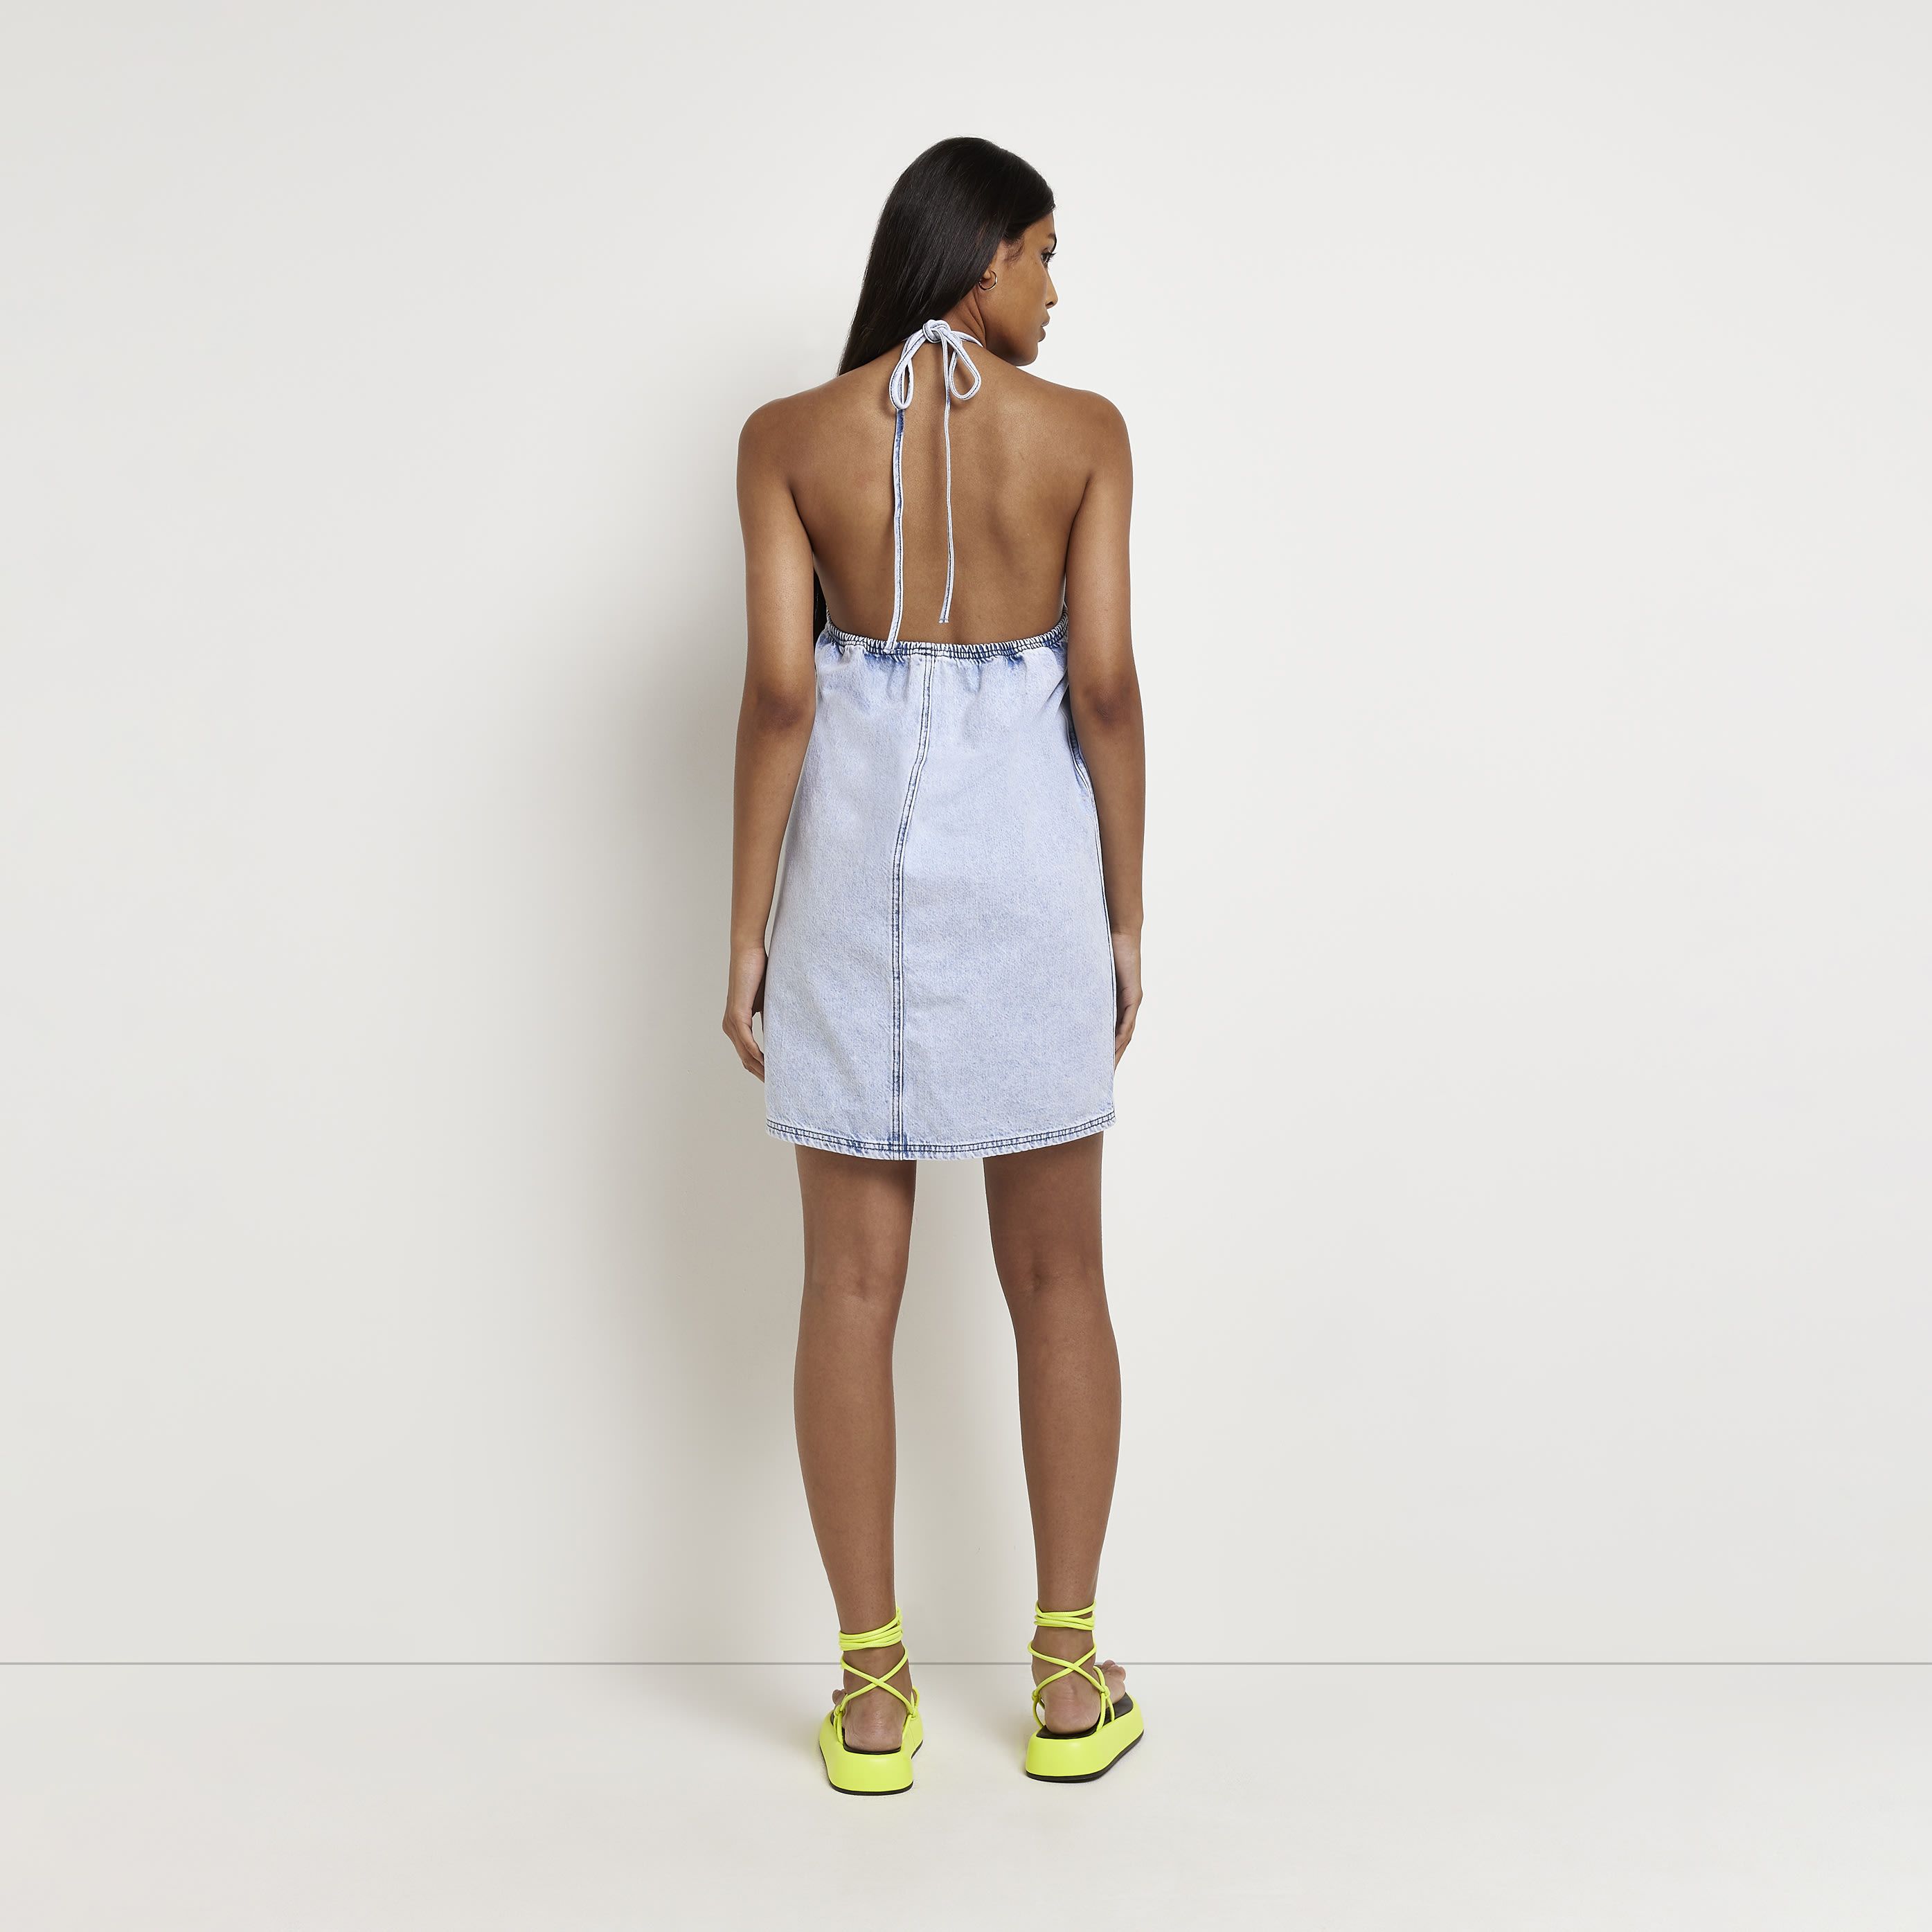 > Brand: River Island> Department: Women> Material: Cotton> Material Composition: 100% Cotton> Style: Slip Dress> Size Type: Regular> Closure: Tie> Neckline: Halter> Sleeve Length: Sleeveless> Dress Length: Midi> Pattern: No Pattern> Occasion: Casual> Selection: Womenswear> Season: SS22